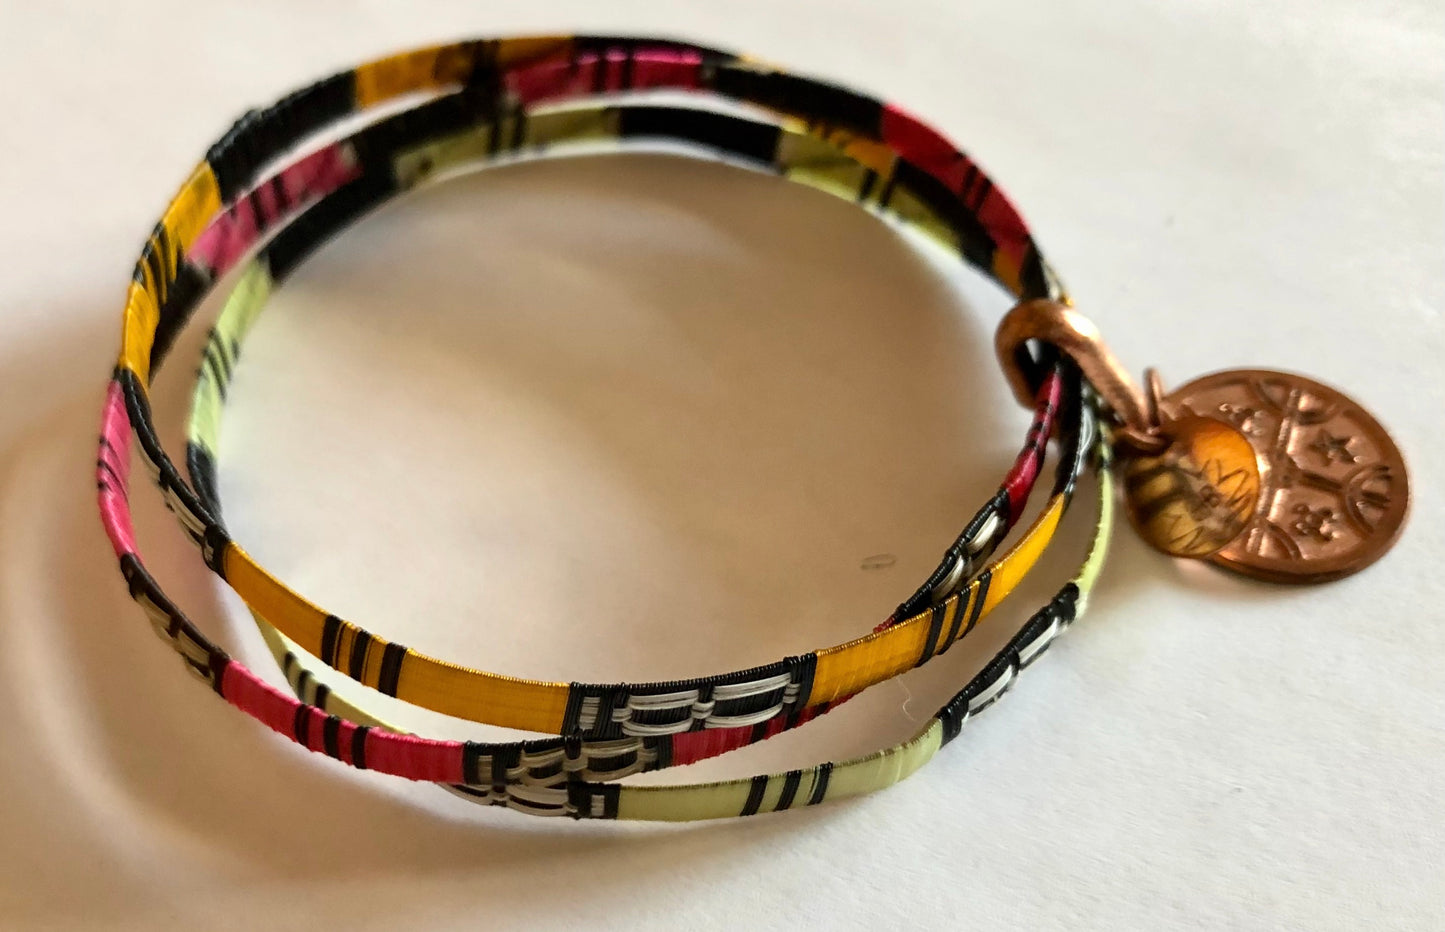 Crin Bangles and Copper Charm by Chantal Bernsau - Pink, Golden Yellow and Palest yellow